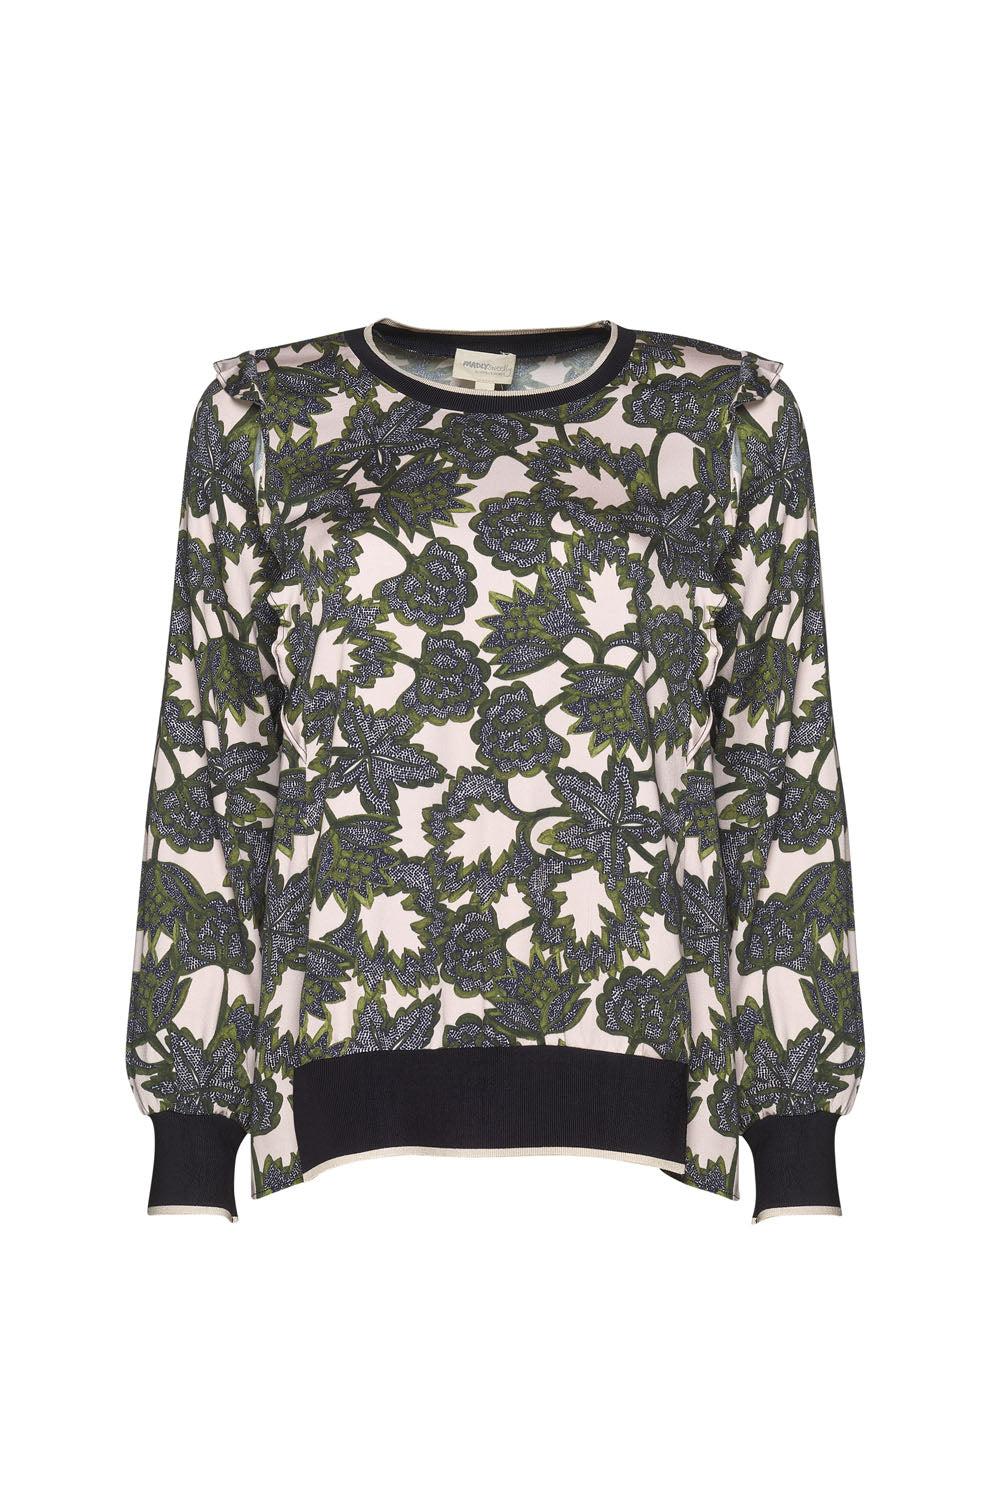 MADLY SWEETLY HEMPSTER TOP - THE VOGUE STORE